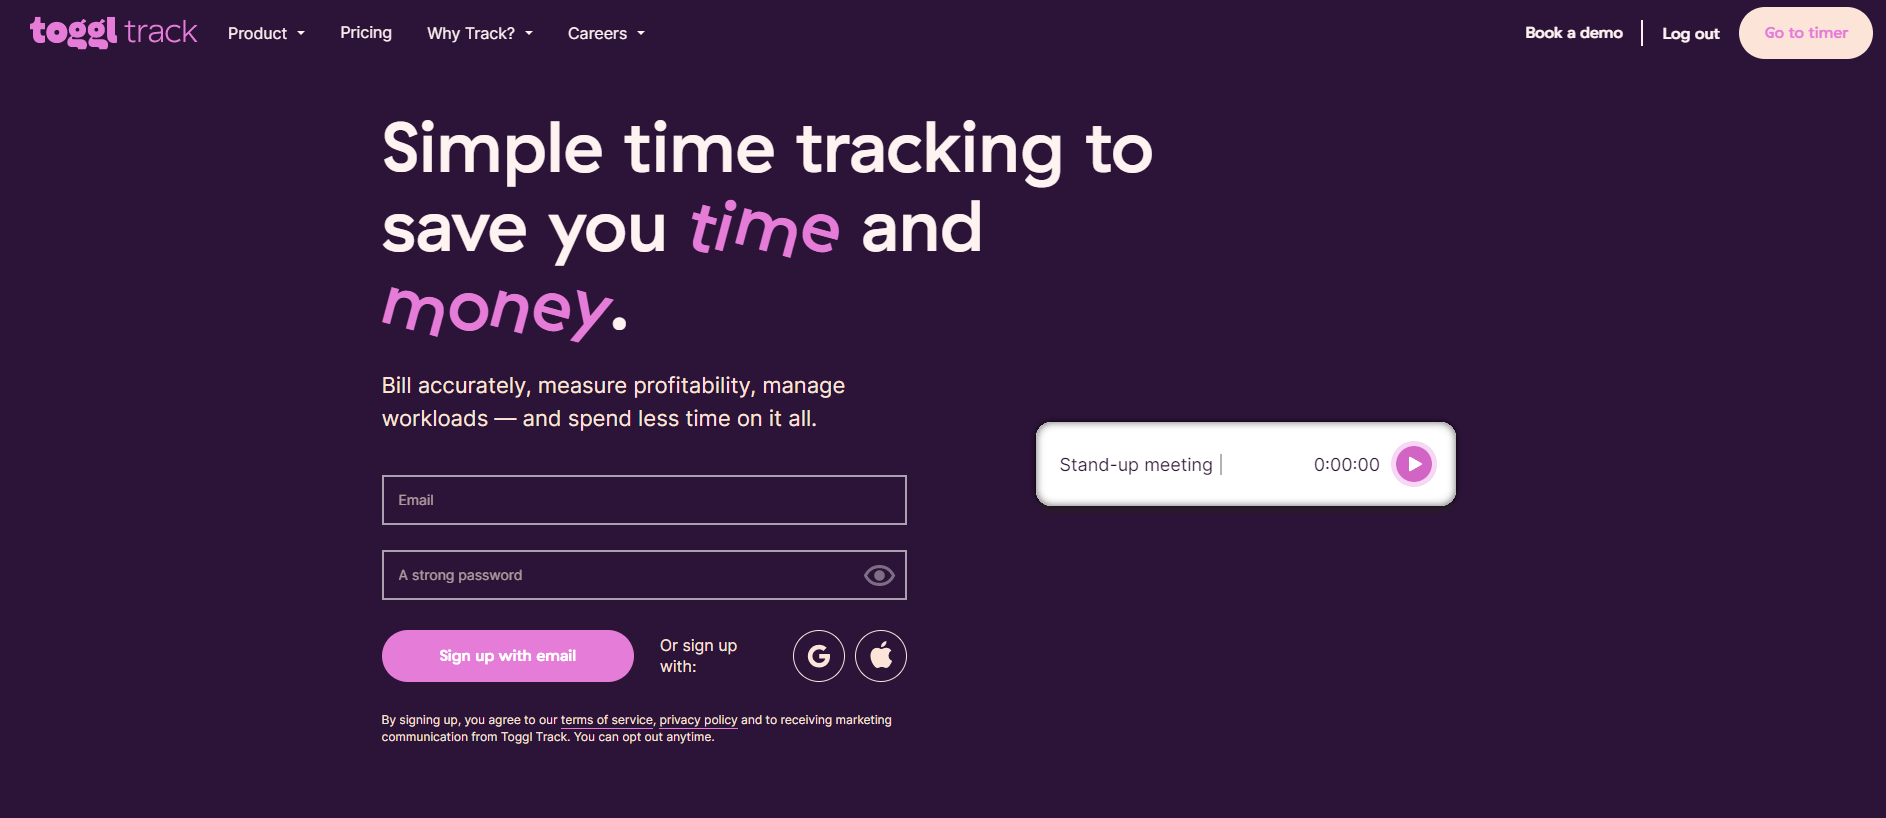 Home page of Toggl, with title of Simple time tracking to save you time and money.